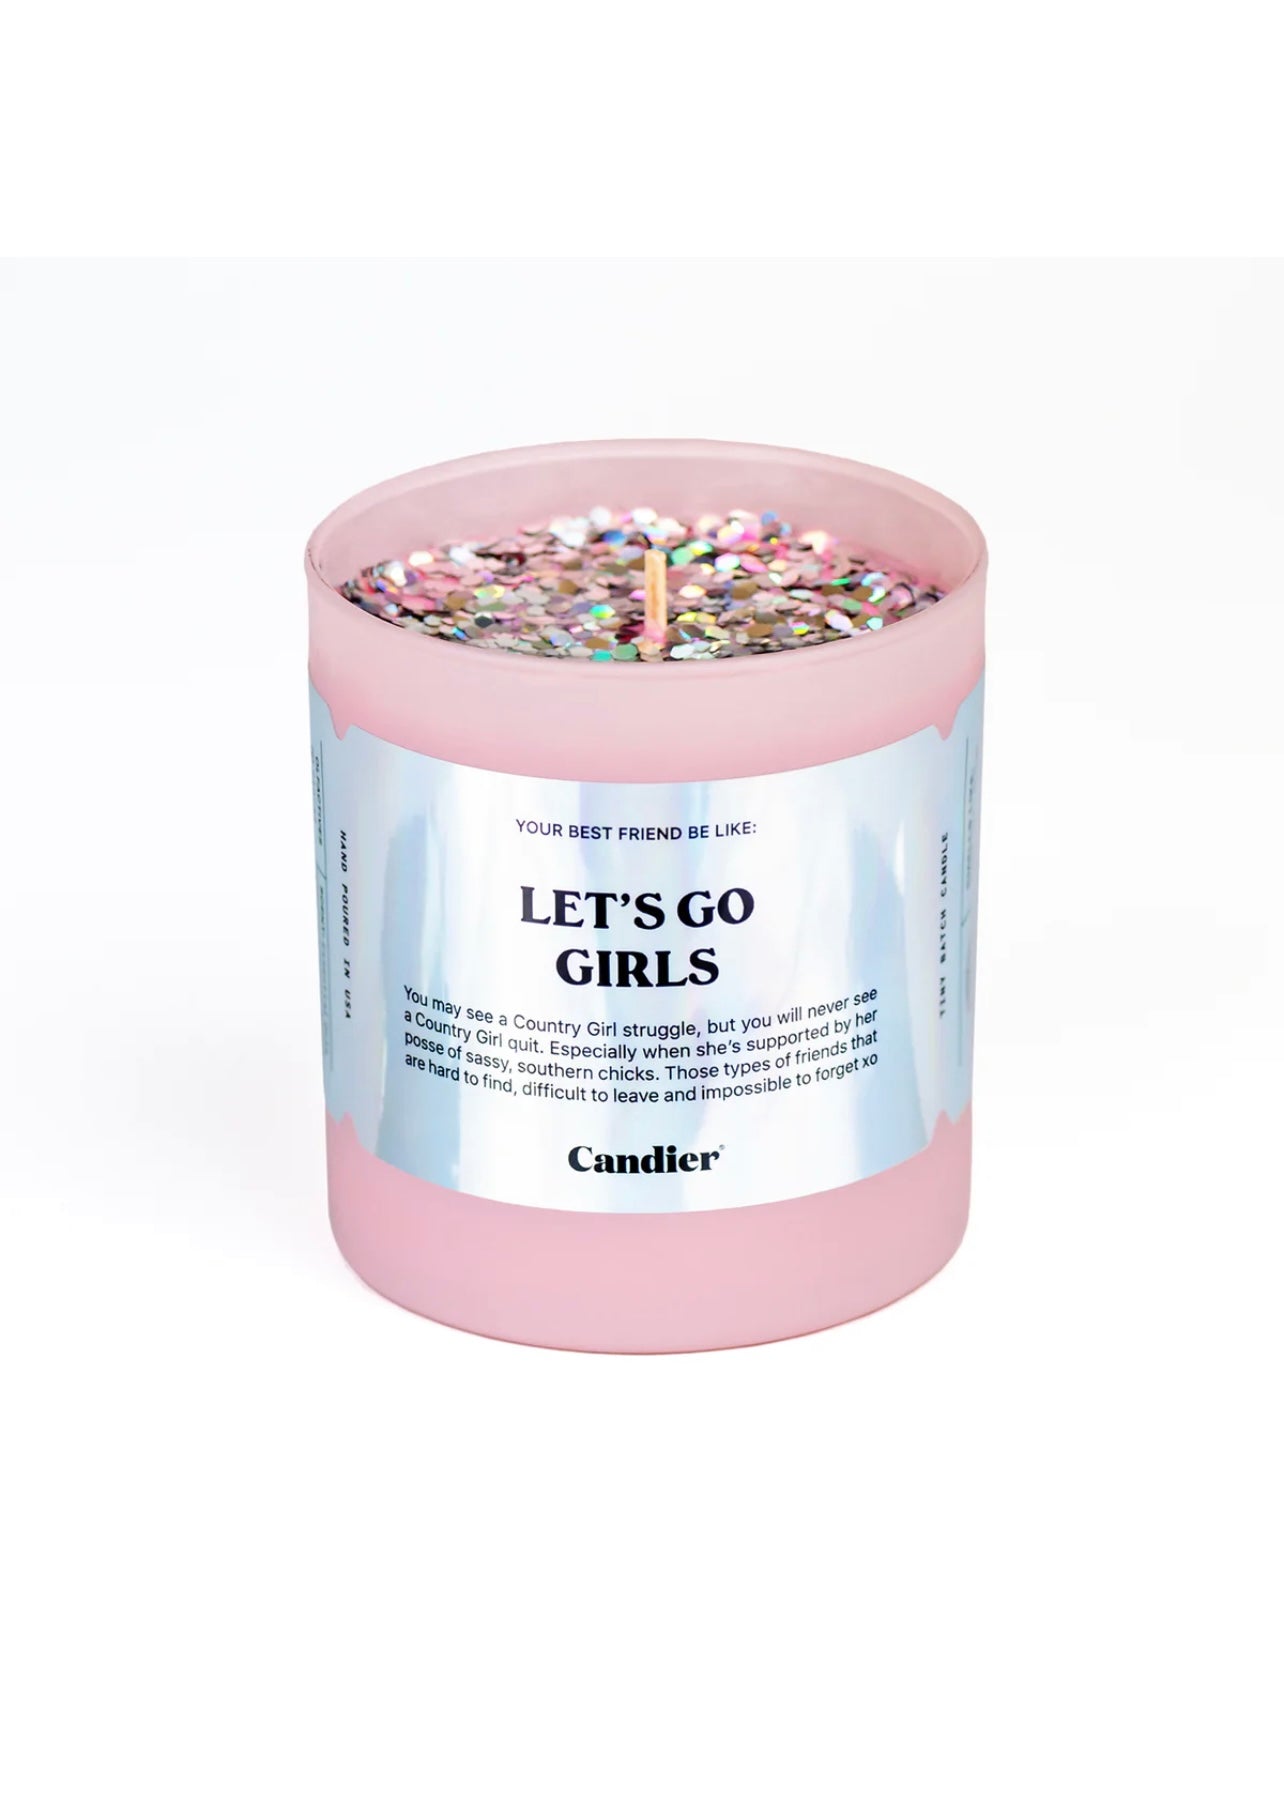 Candier Candles "Let's Go Girls"